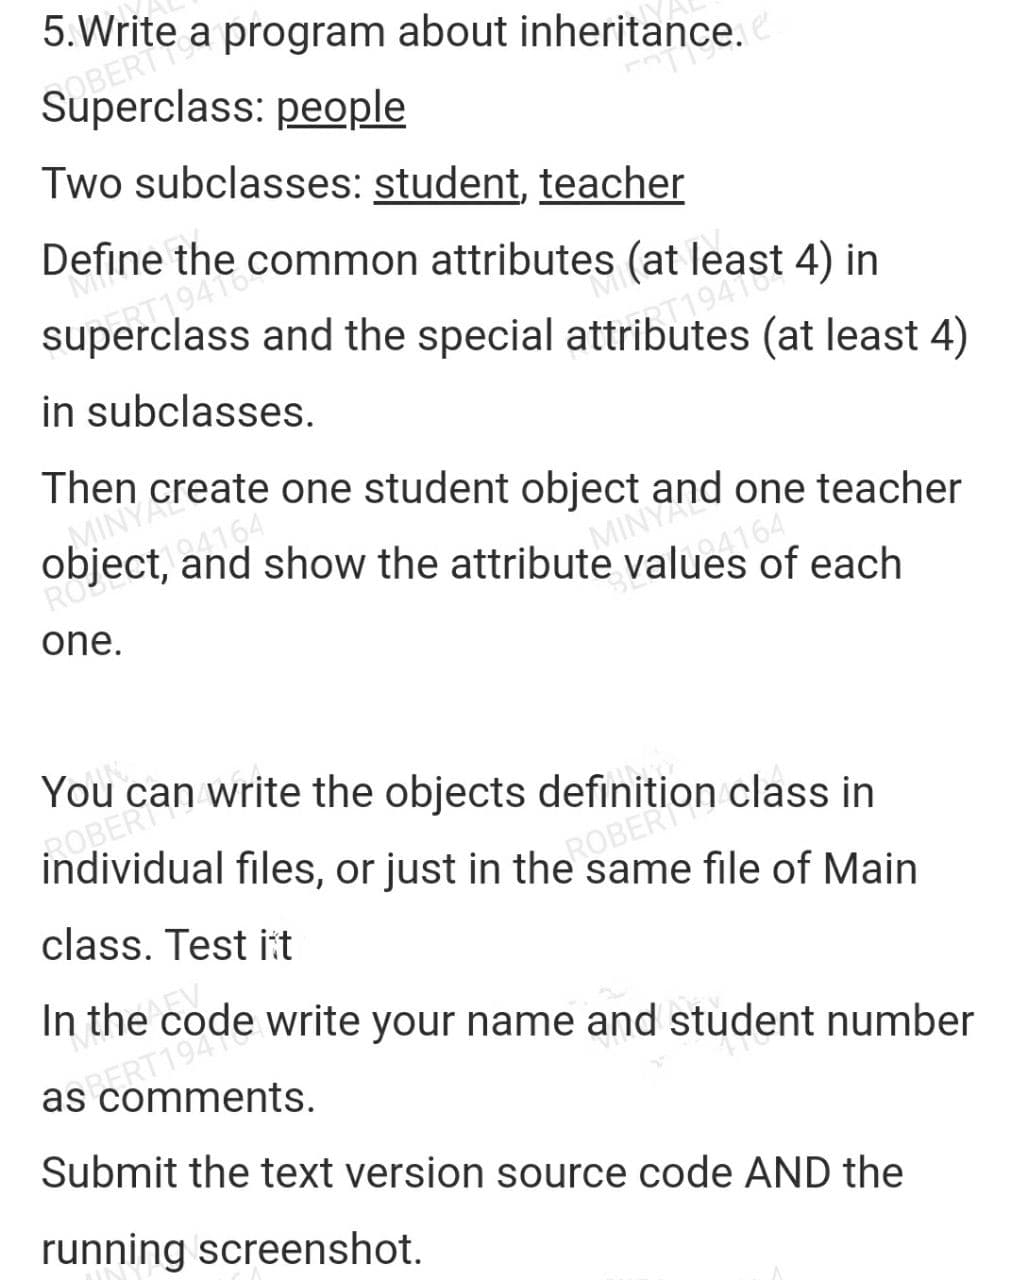 5.Write a program about inheritance.e
Sas: people
Two subclasses: student, teacher
Define
Mil
MI
1941 Common attributes (at least 4) in
superclass and the special attrib. 1948
(at least 4)
in subclasses.
OMINY Create one student object a
I show the attribute value4164
it. and
MINYand one teacher
RO
each
one.
You
ROBERT Write the objects definition class in
individual files, or just in the same file of Main
ROBERTO
class. Test it
In the code write your name and student number
SPERments.
Submit the text version source code AND the
running screenshot.